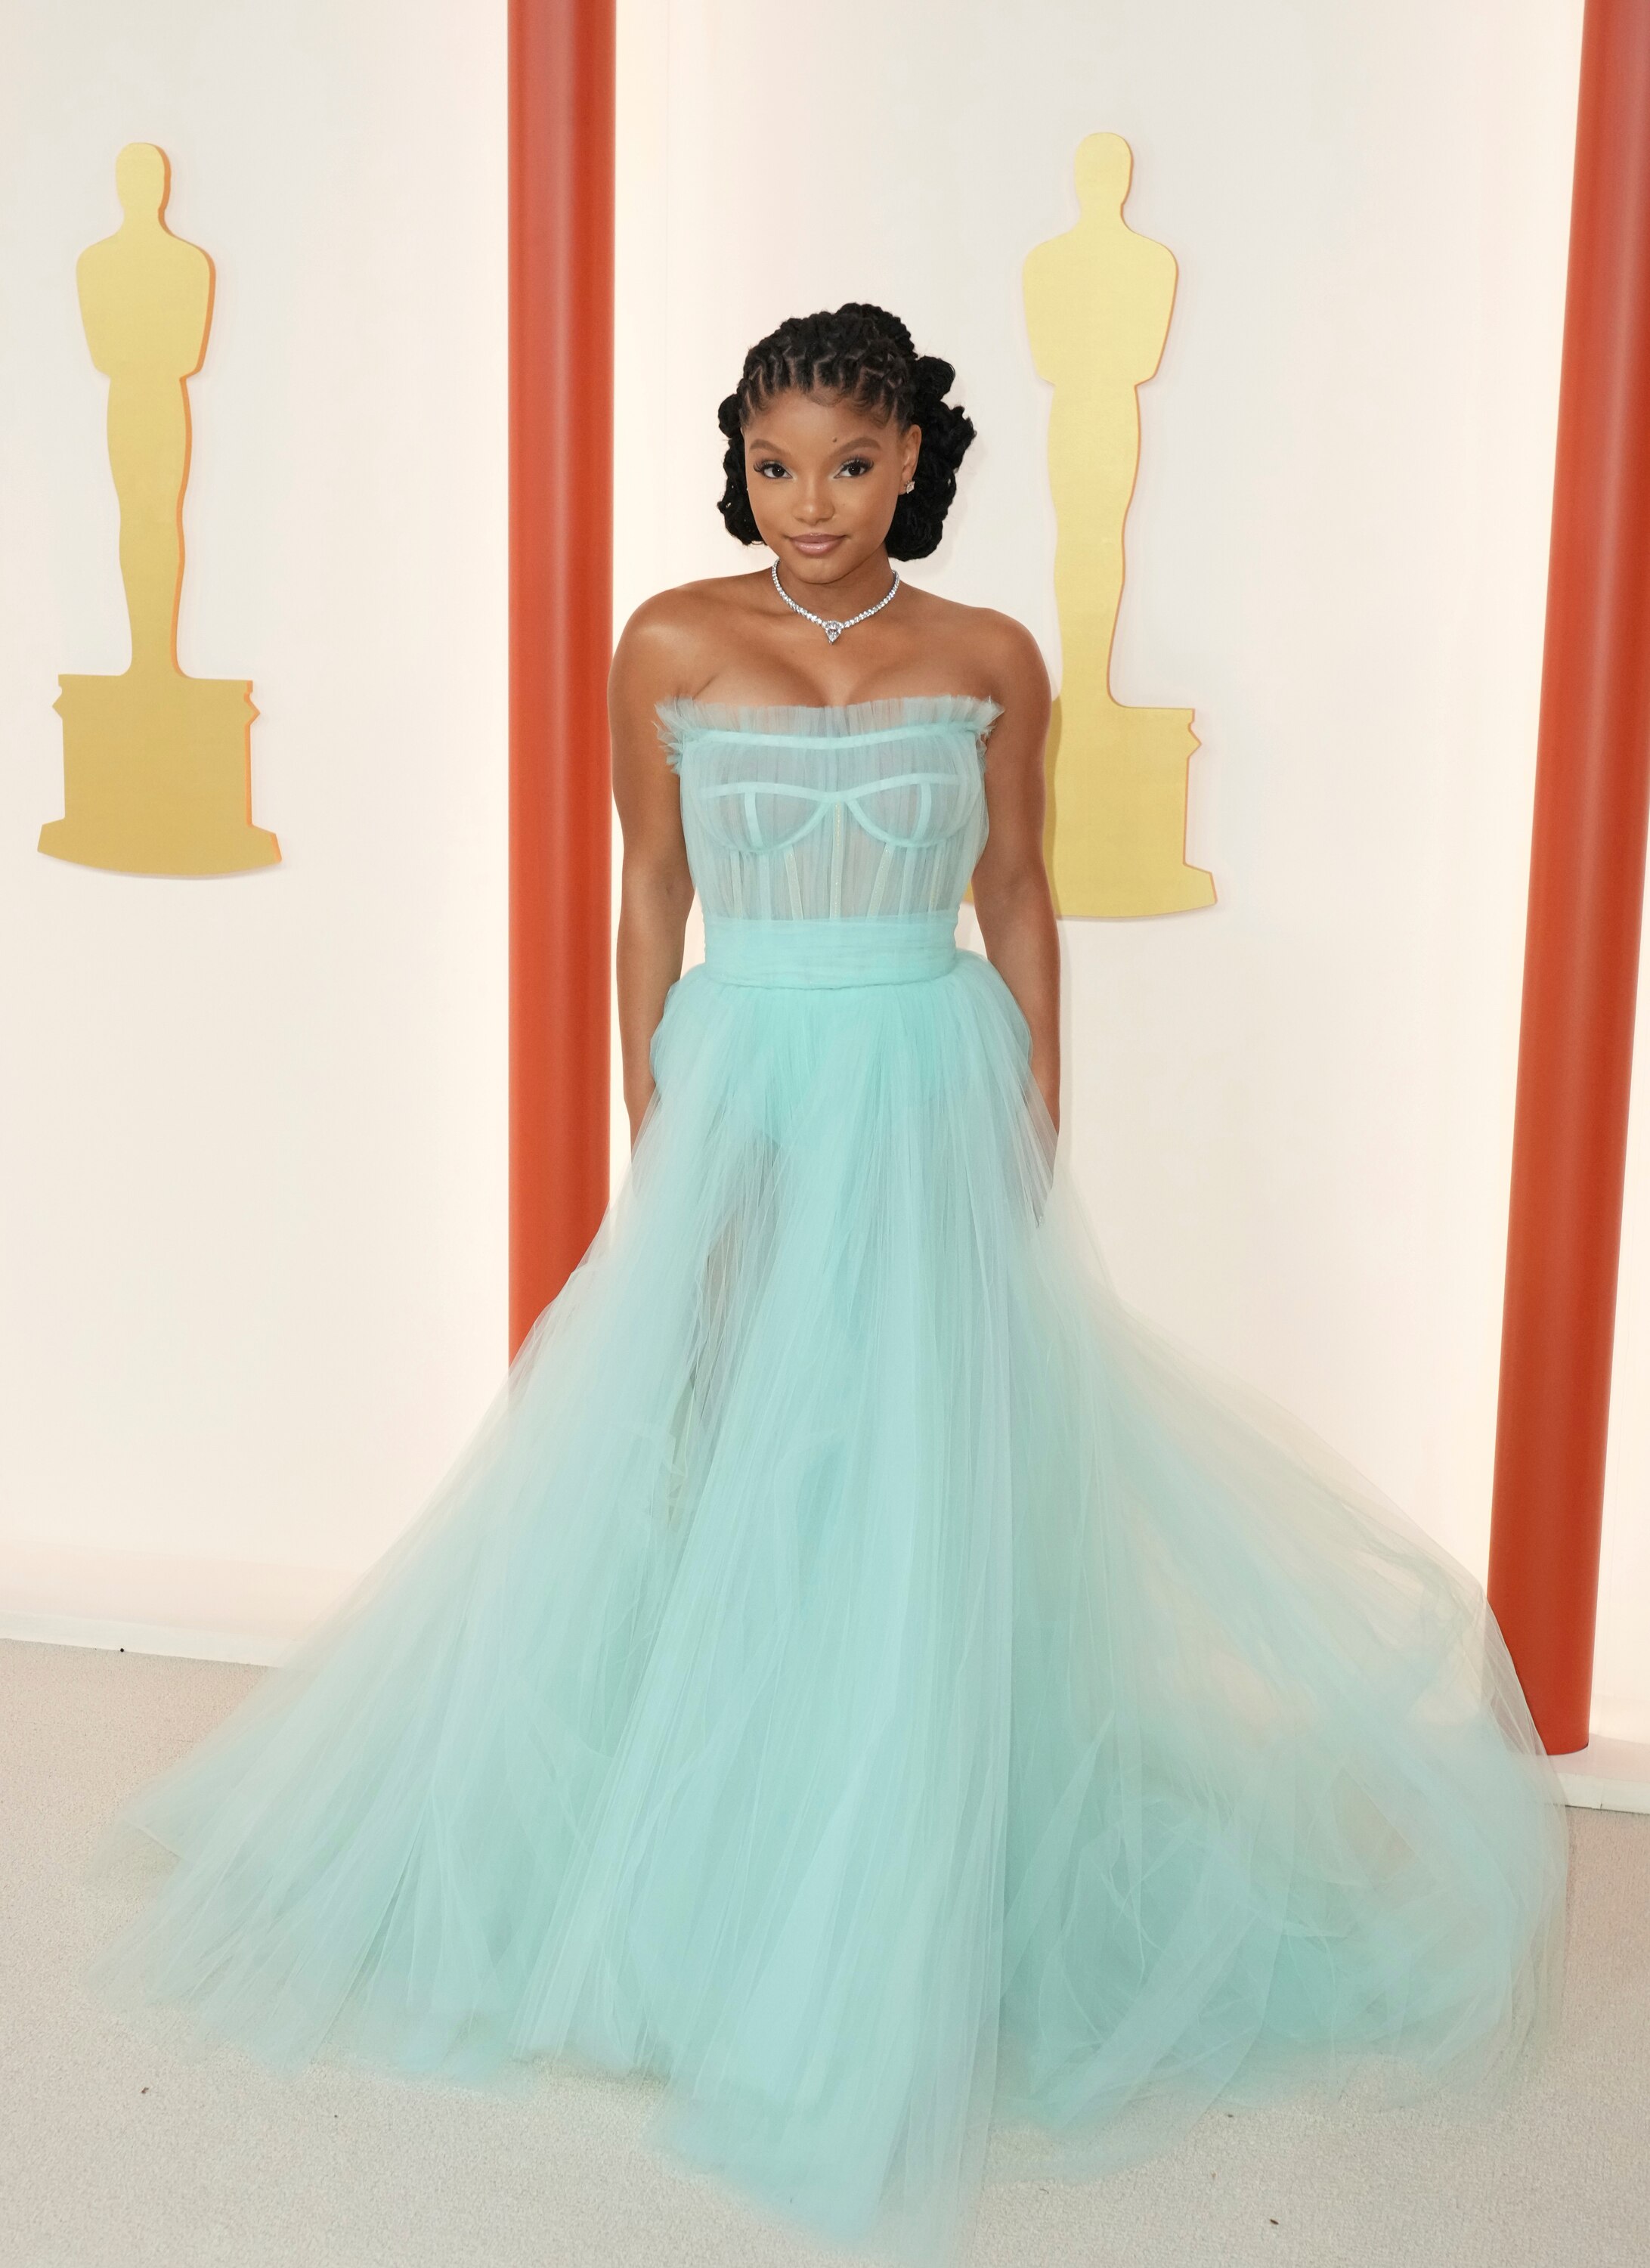 Halle Bailey wearing a pale blue tulle strapless gown with a full floor-length skirt and coreset-like boning